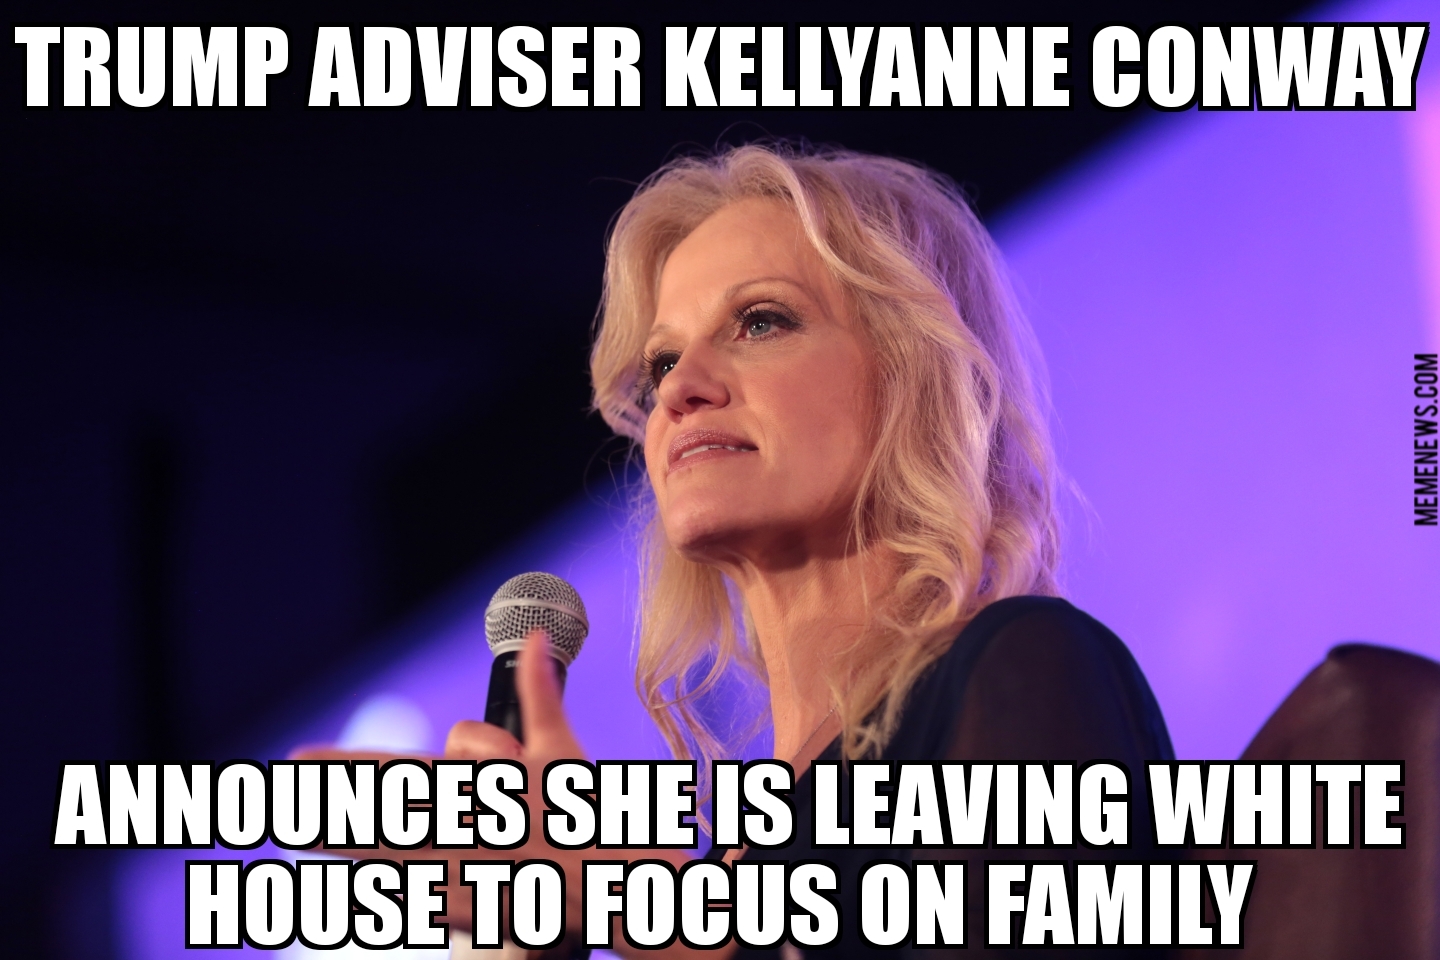 Kellyanne Conway to leave White House